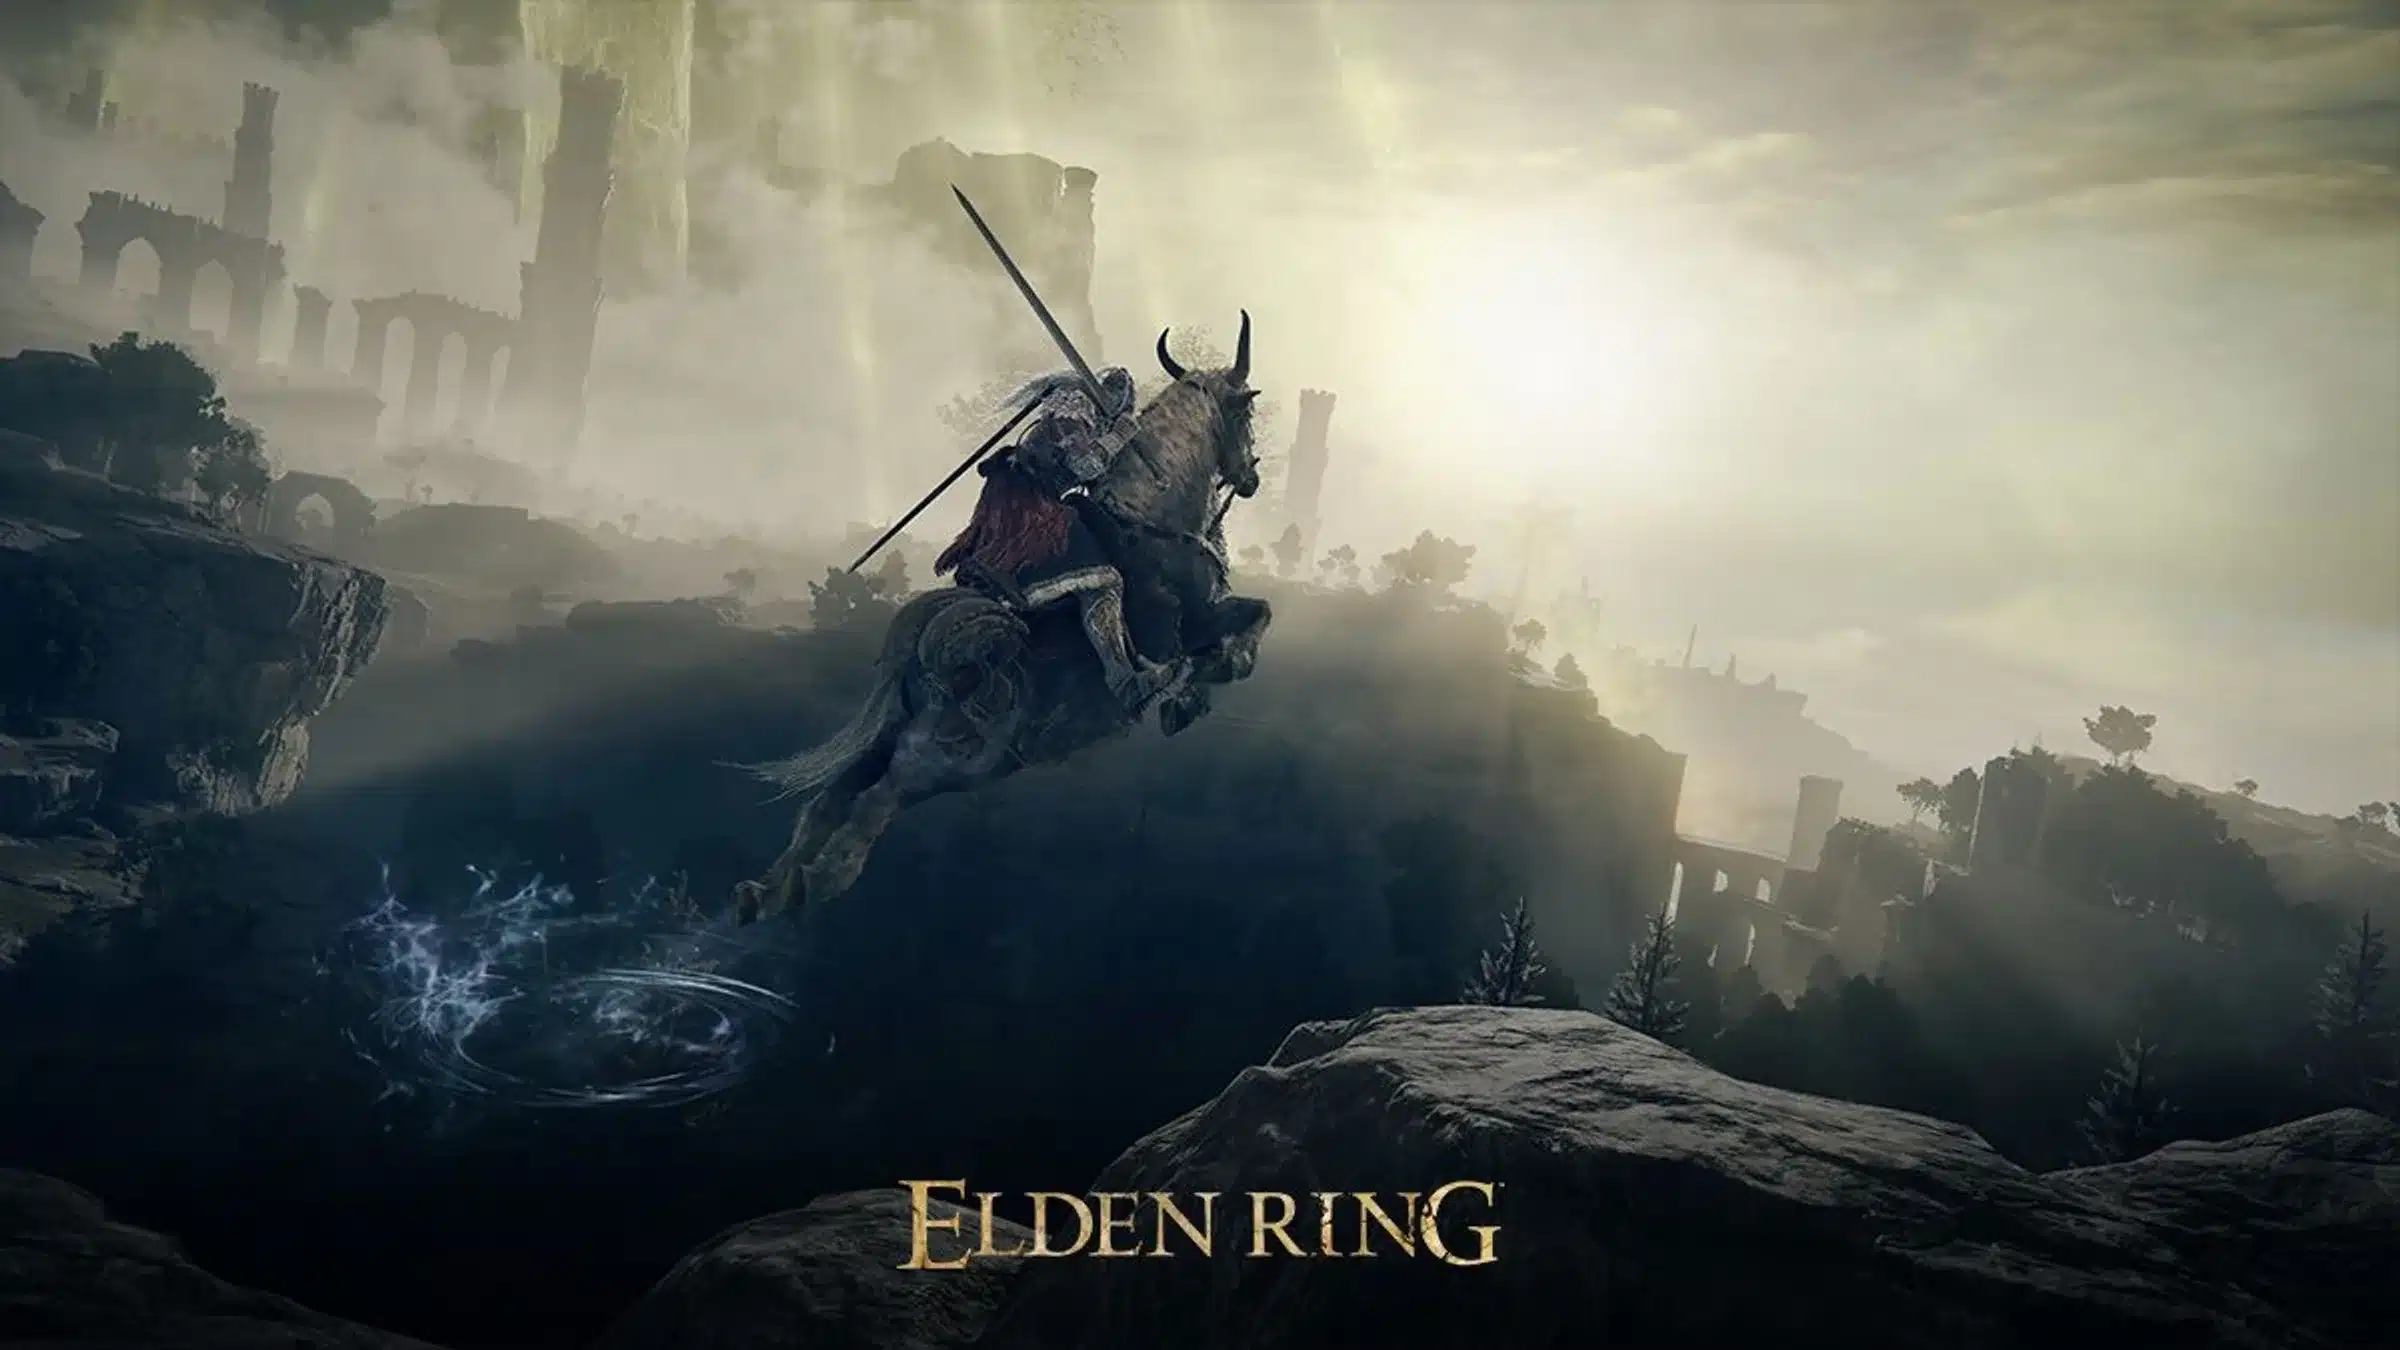 Elden Ring: How to unlock all six endings that we know of so far